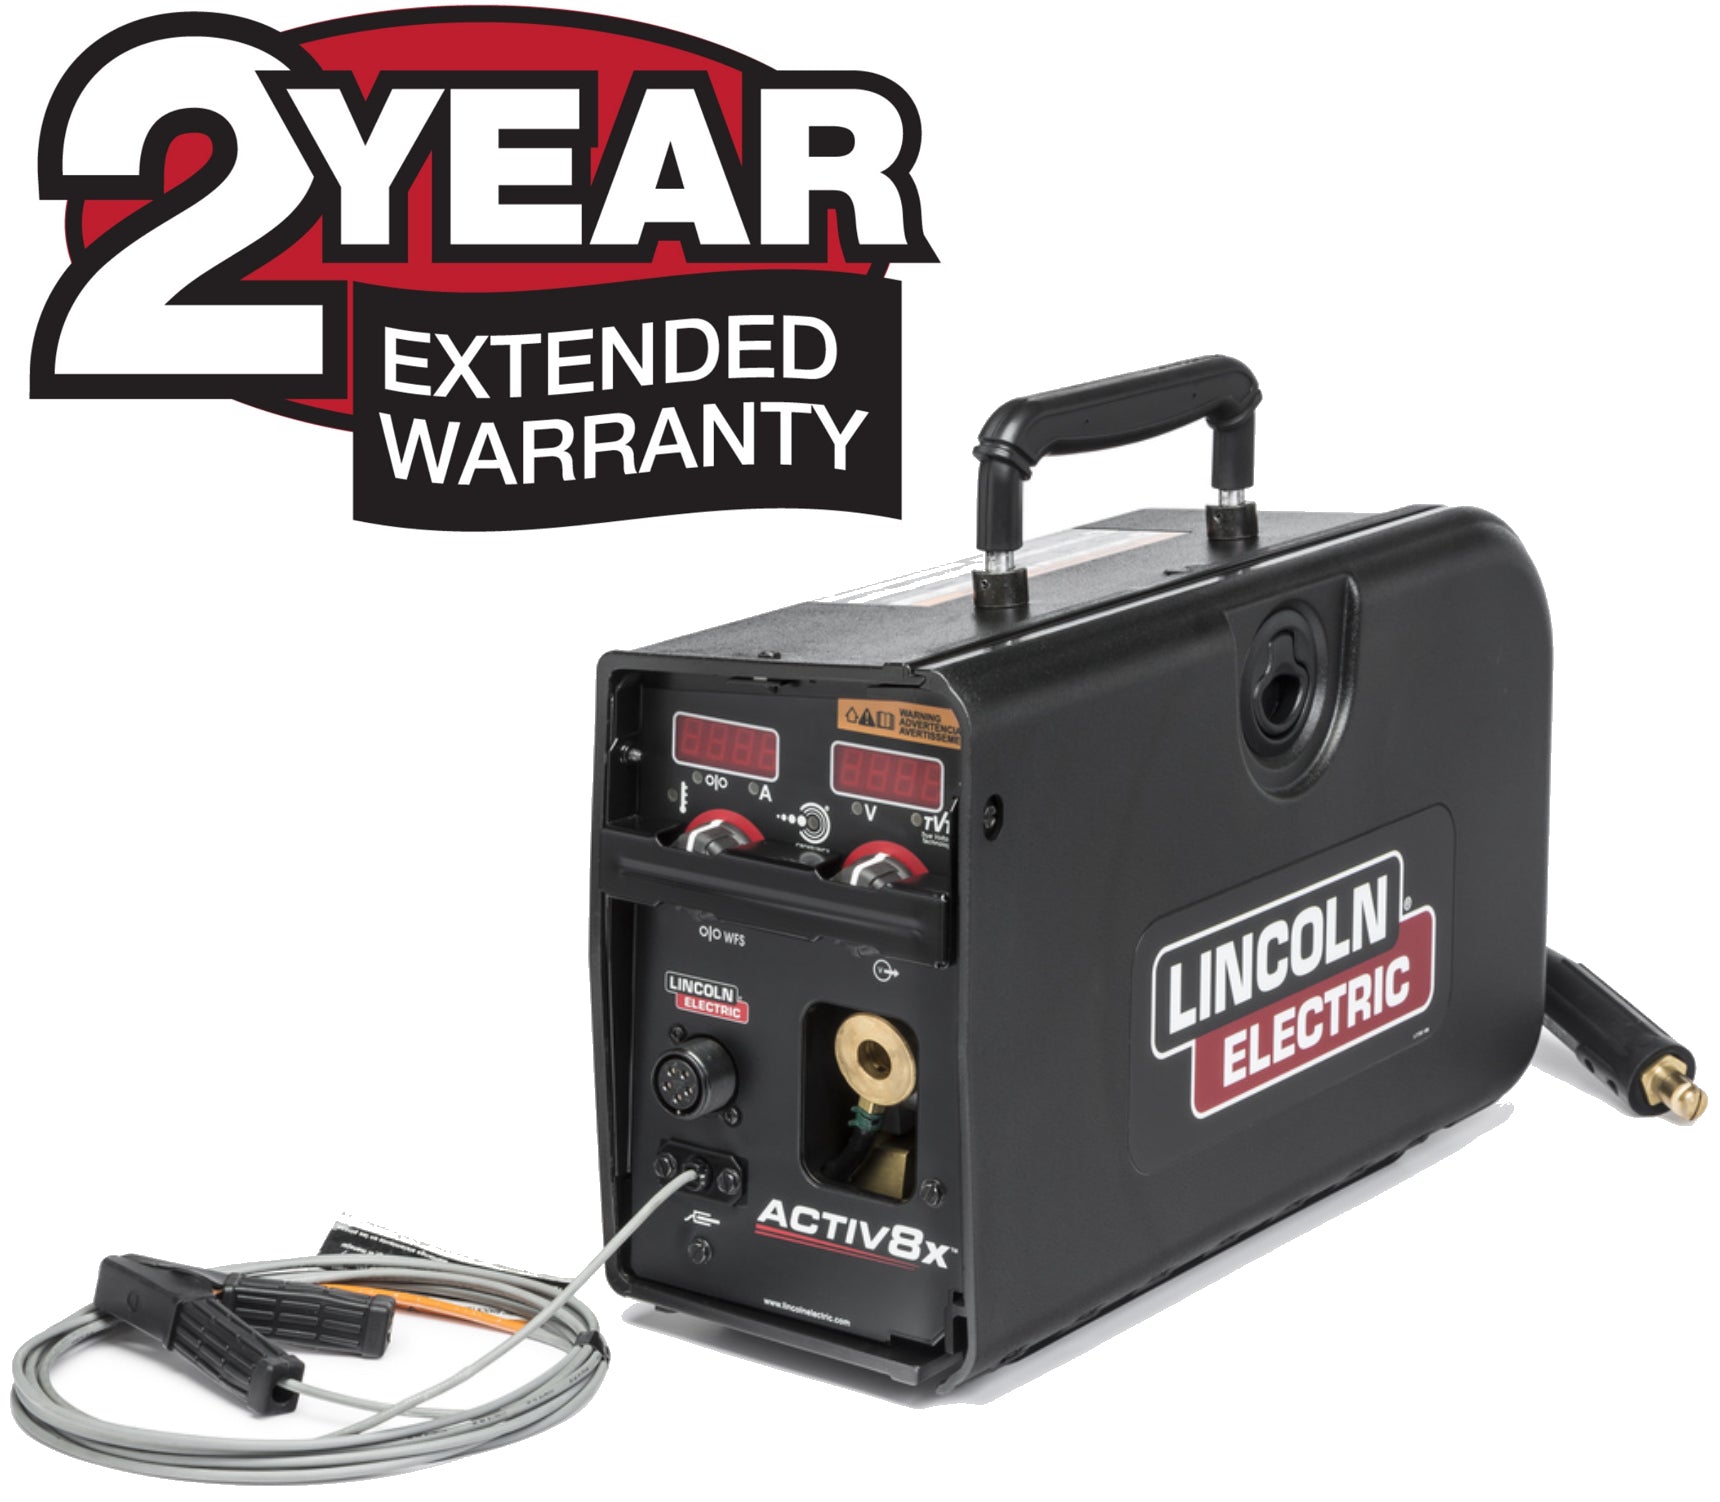 Lincoln 2-Year Extended Warranty - Activ8X X3519